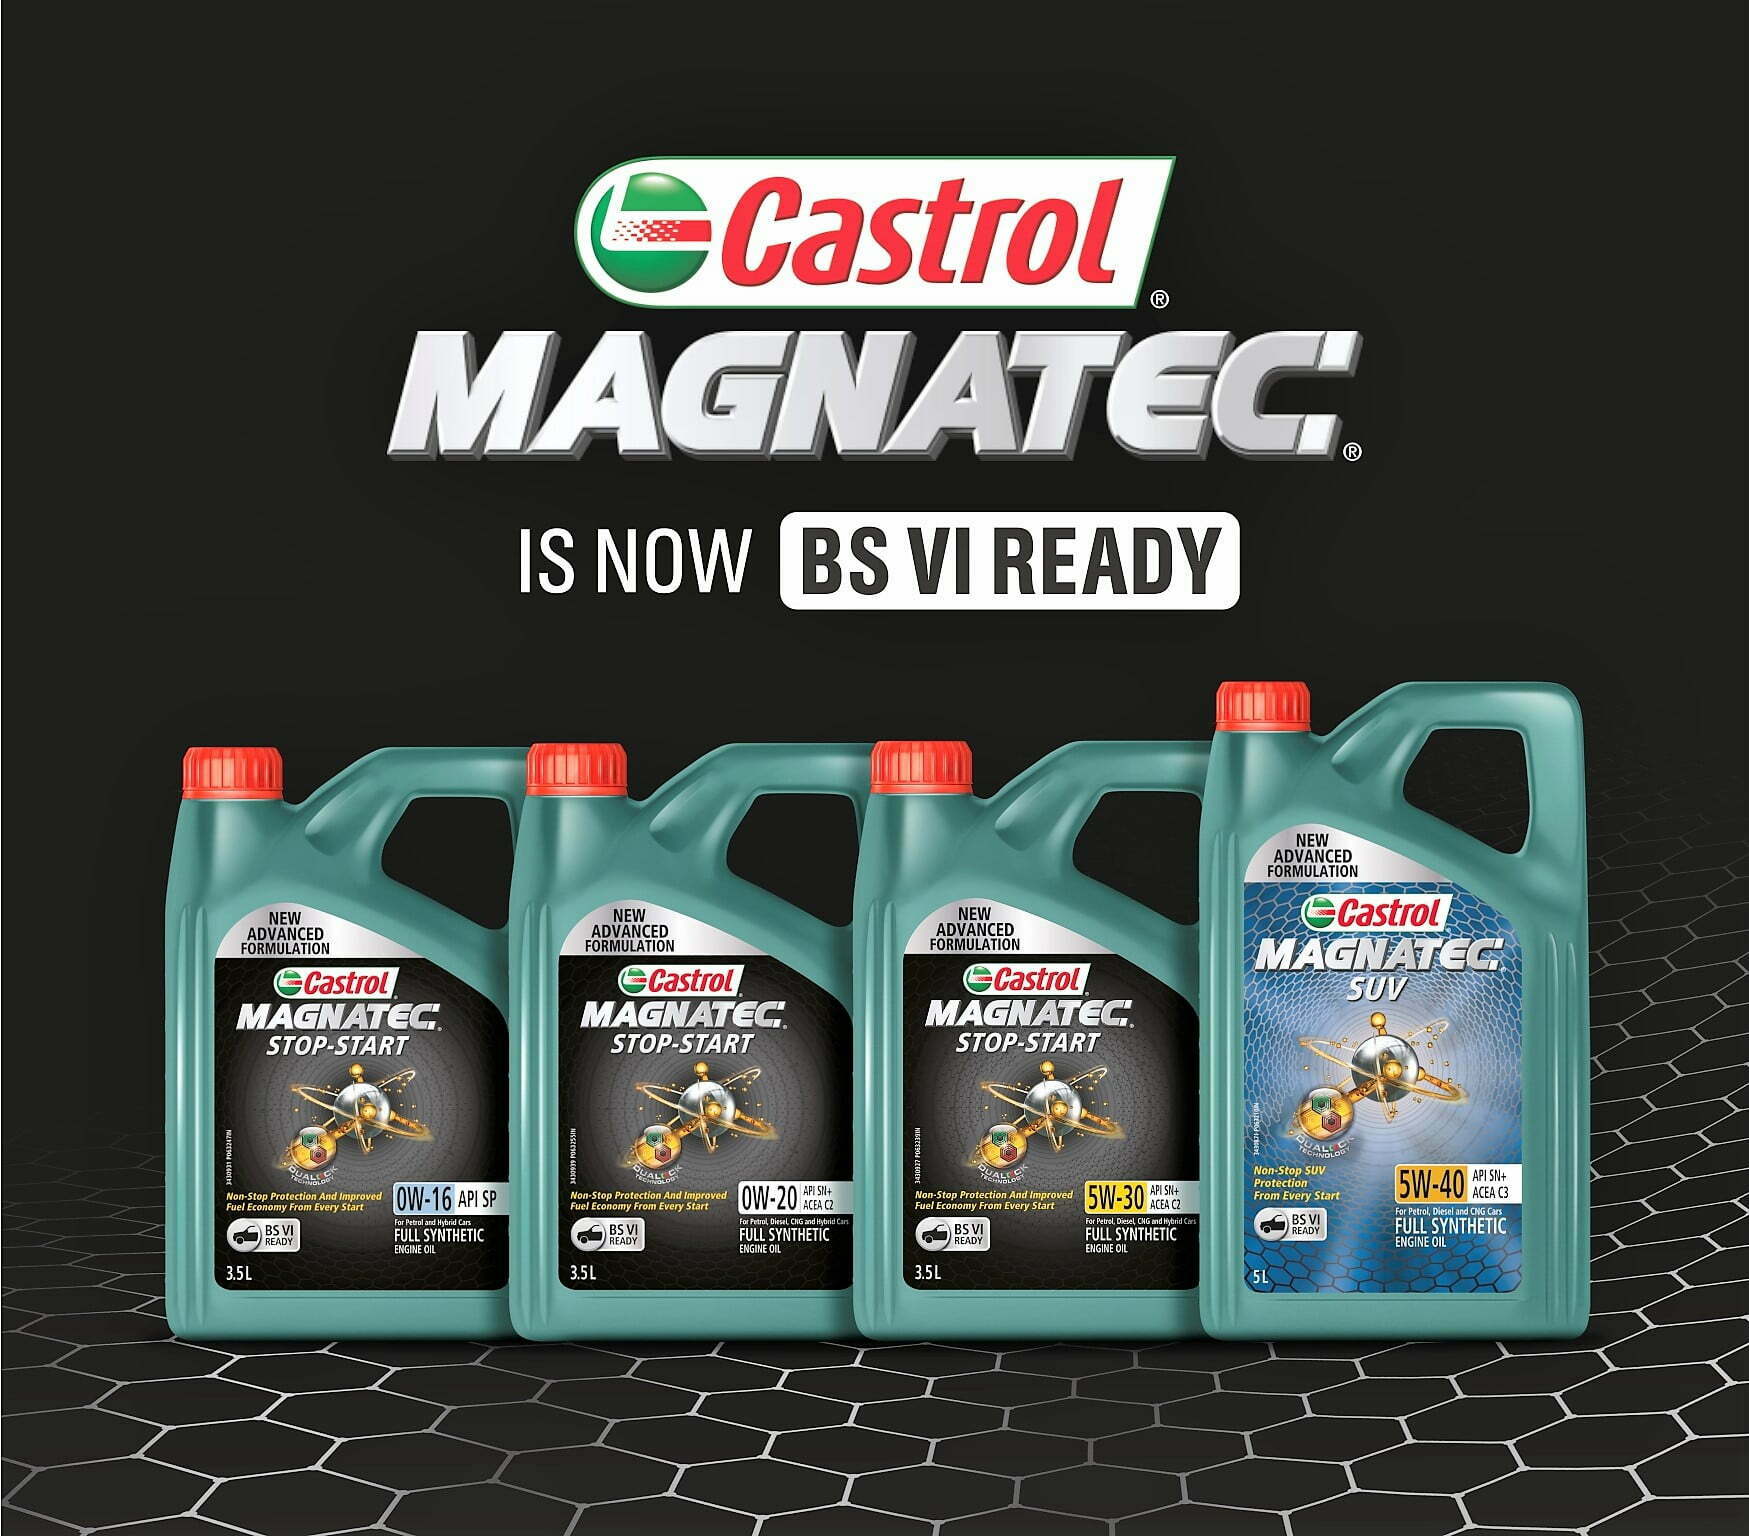 Castrol MAGNATEC BS6 Oil Launched For Cars And SUV's!